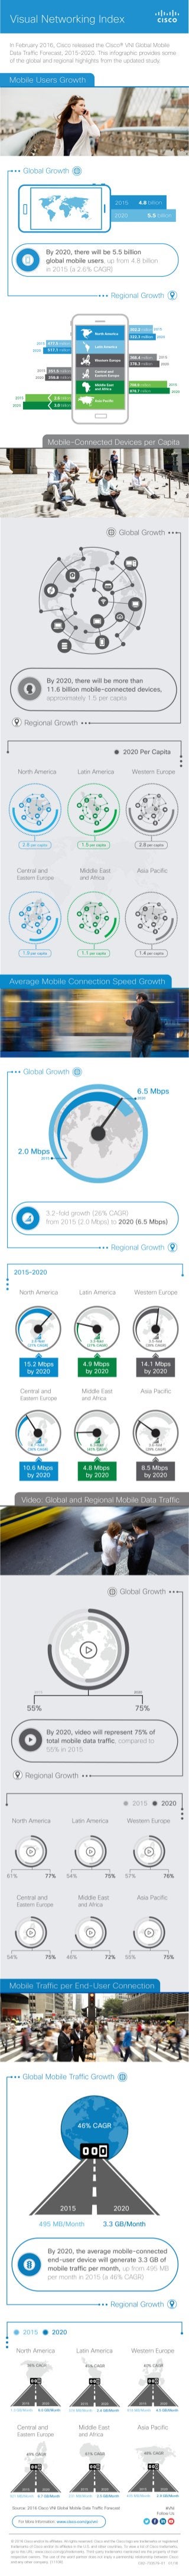 [Infographic] Cisco Visual Networking Index (VNI) Global Mobile Data Traffic Forecast, 2015 2020